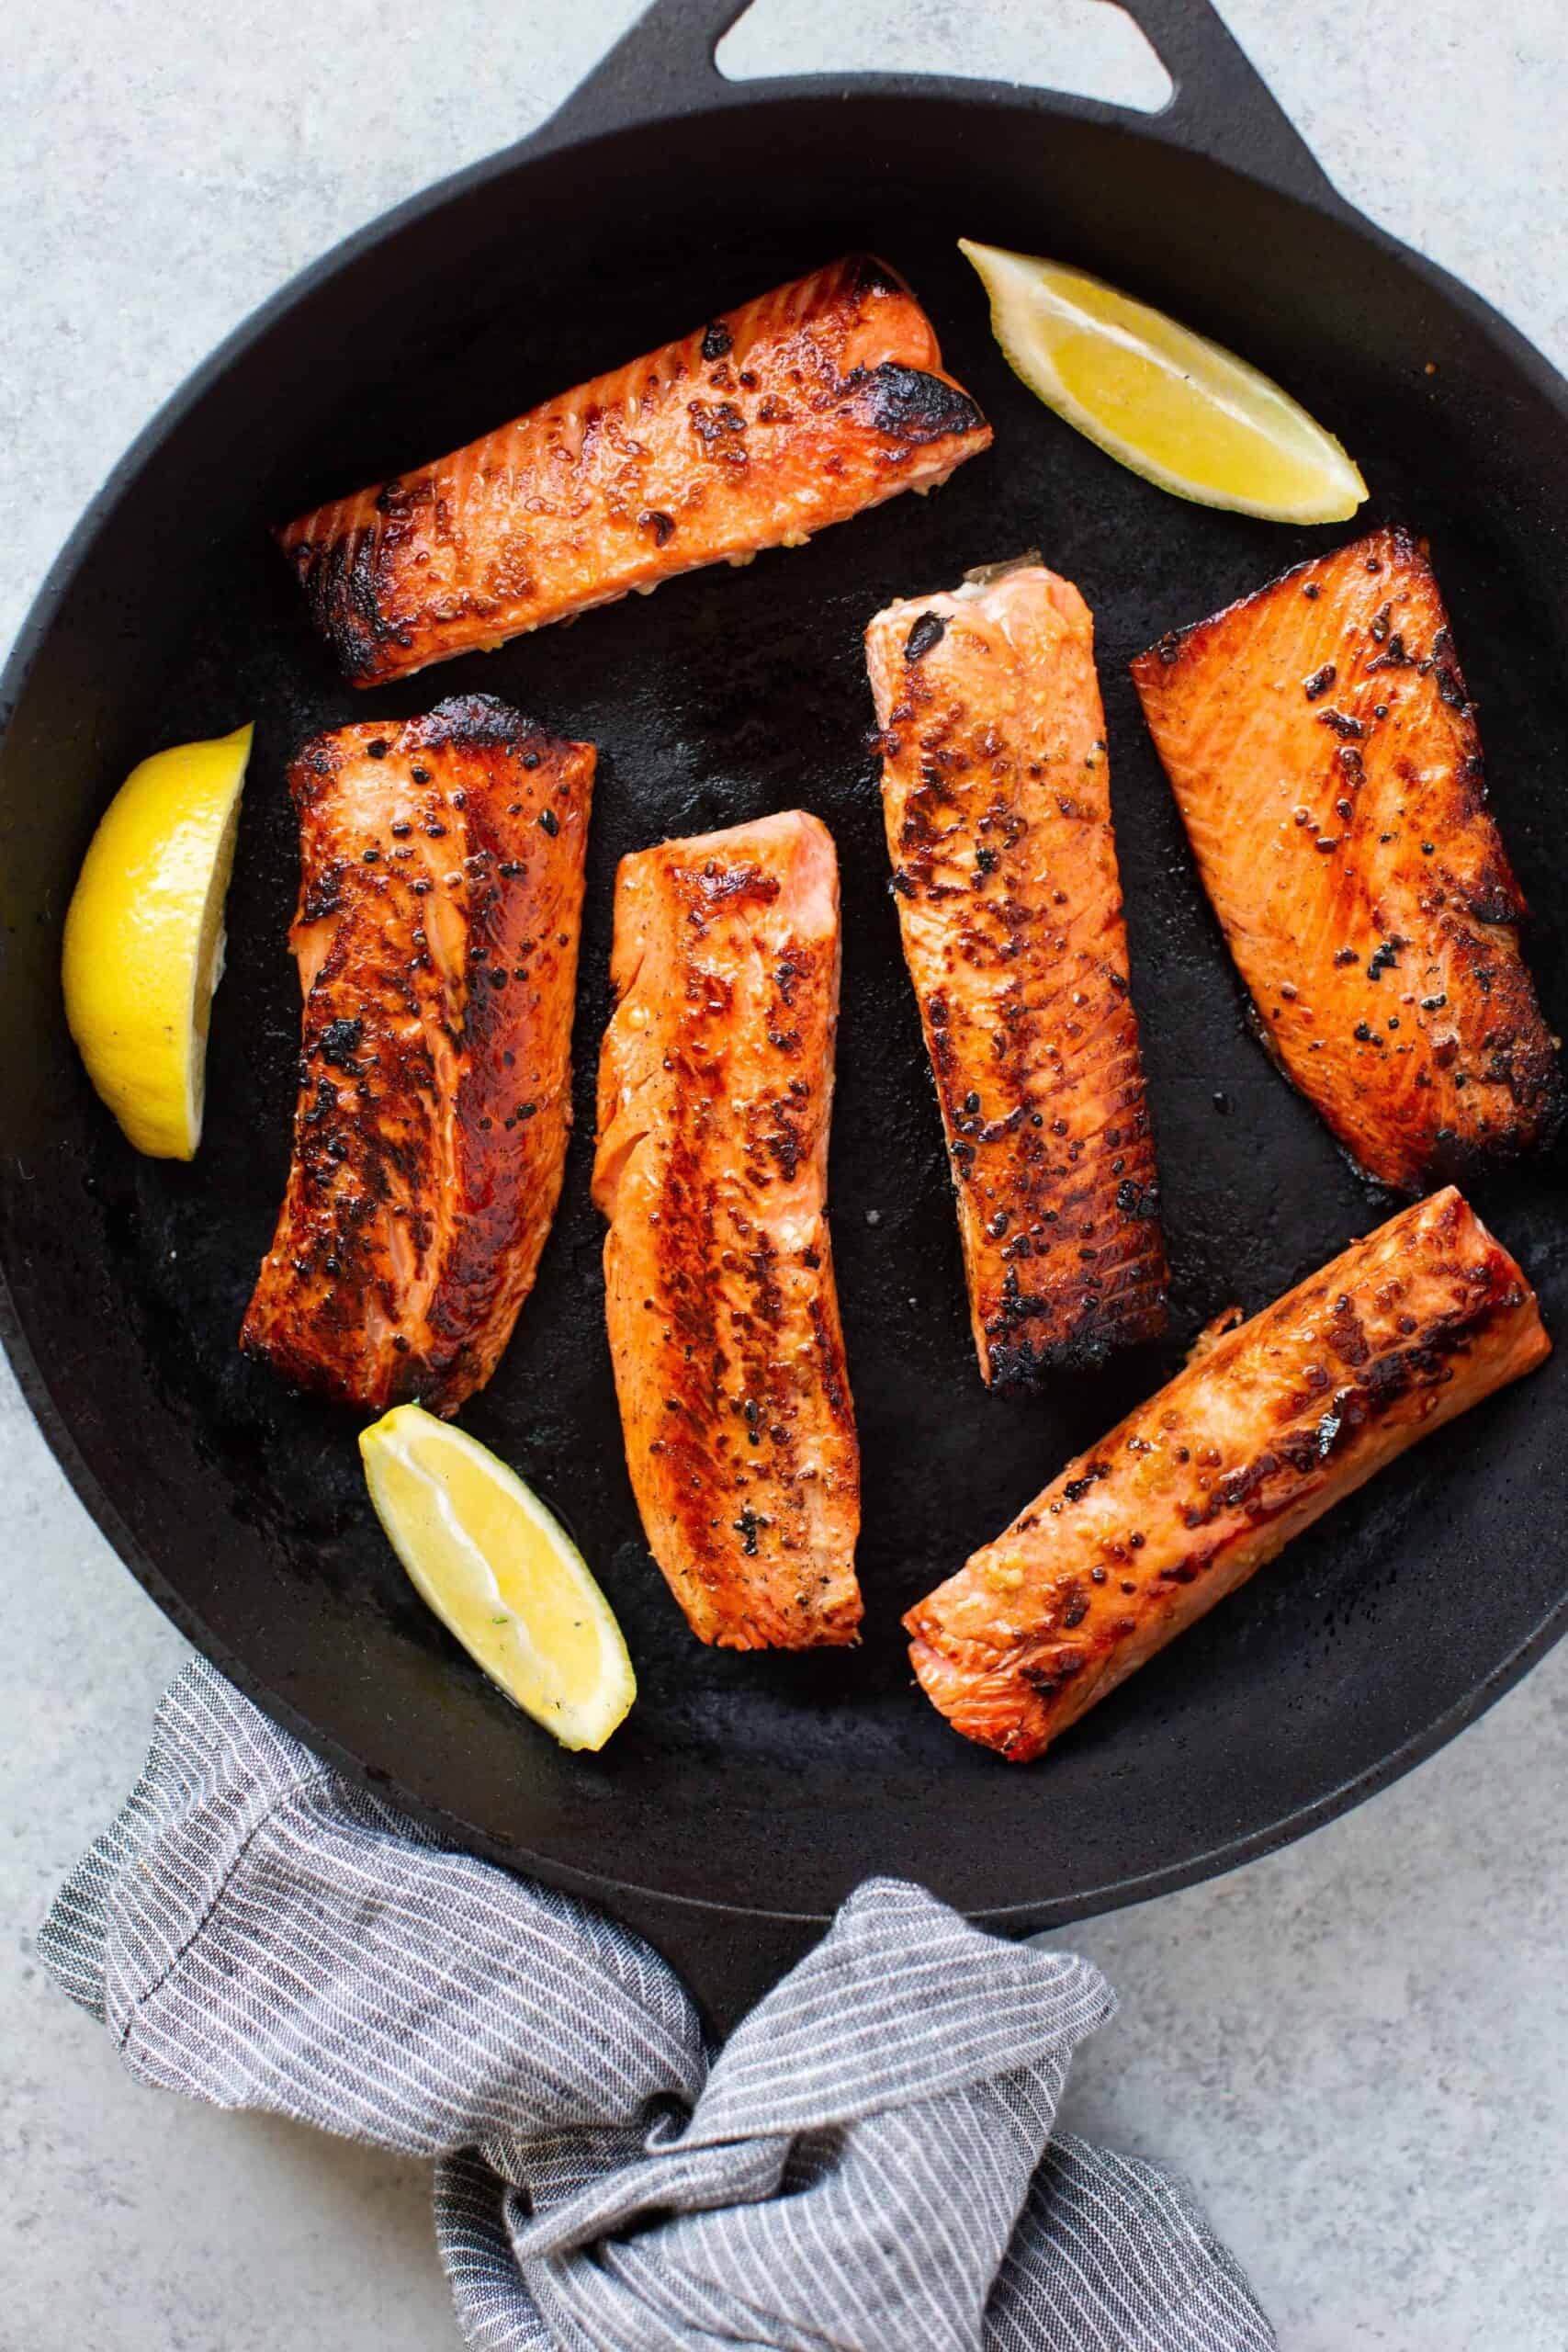 Honey garlic salmon recipe with lemon spices in a skillet.